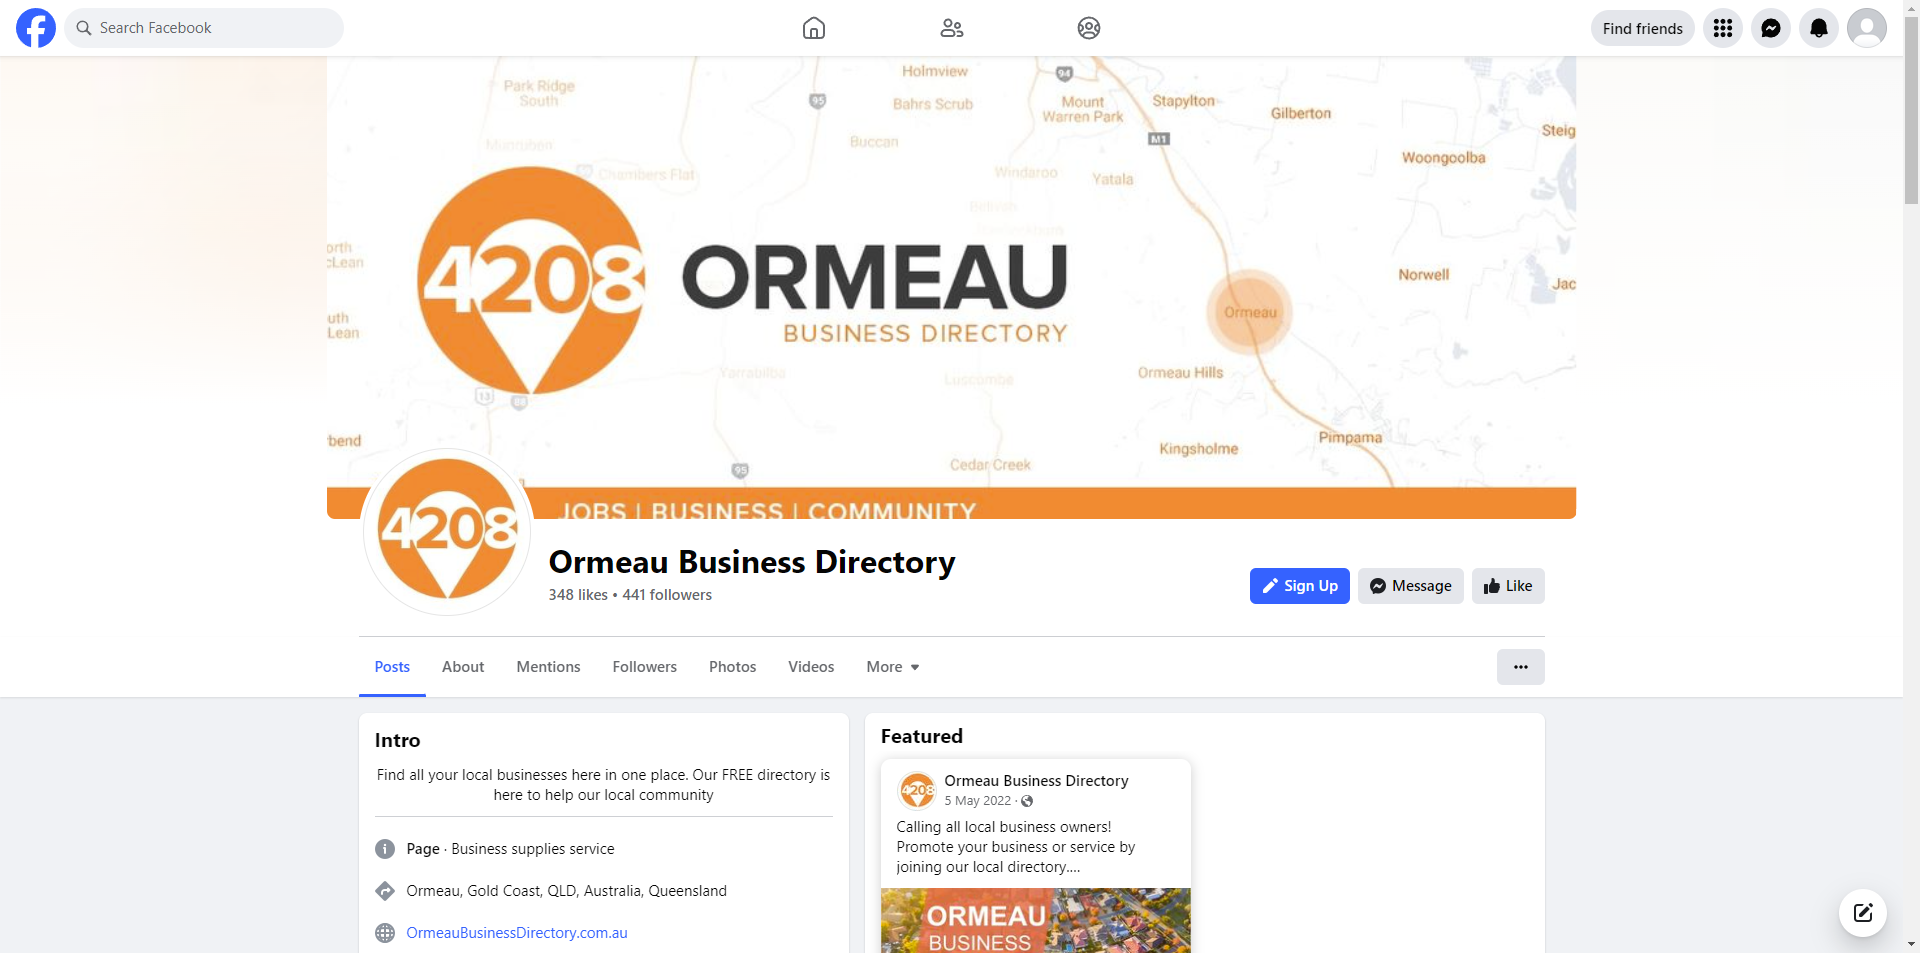 Ormeau Business Directory